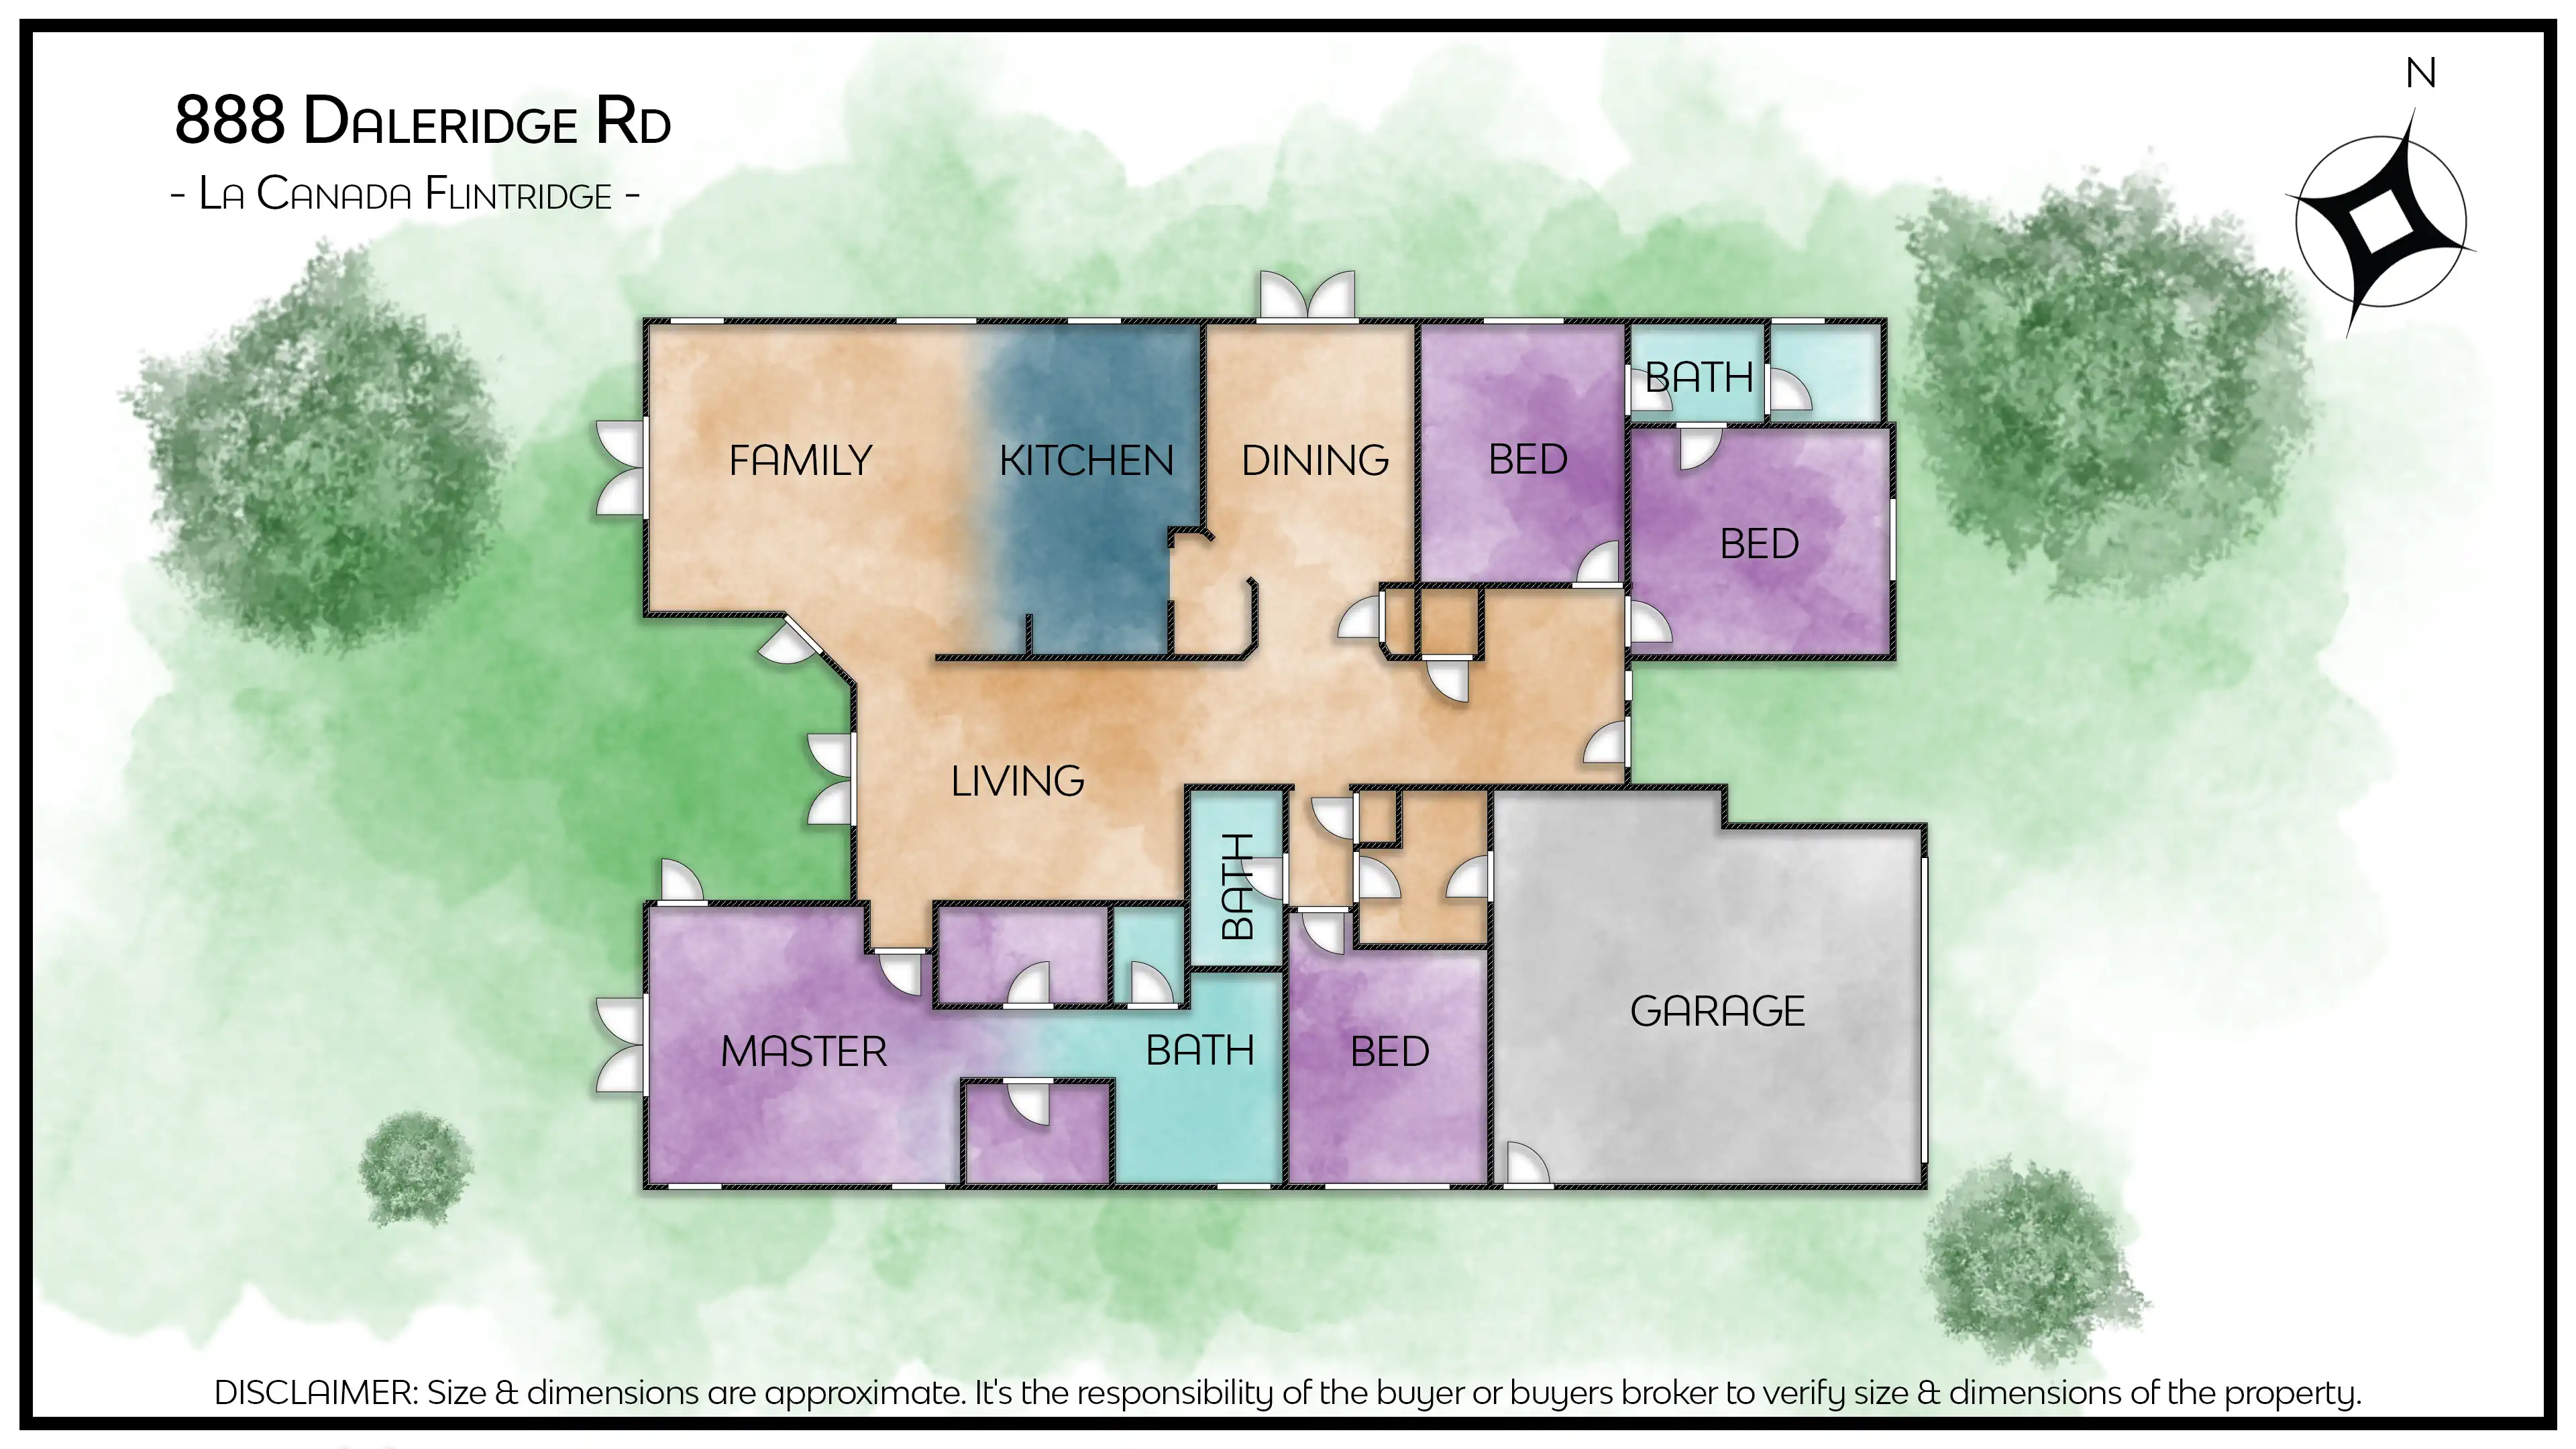 An artistic watercolor floor plan showcasing the layout of a property for sale in the MLS listing